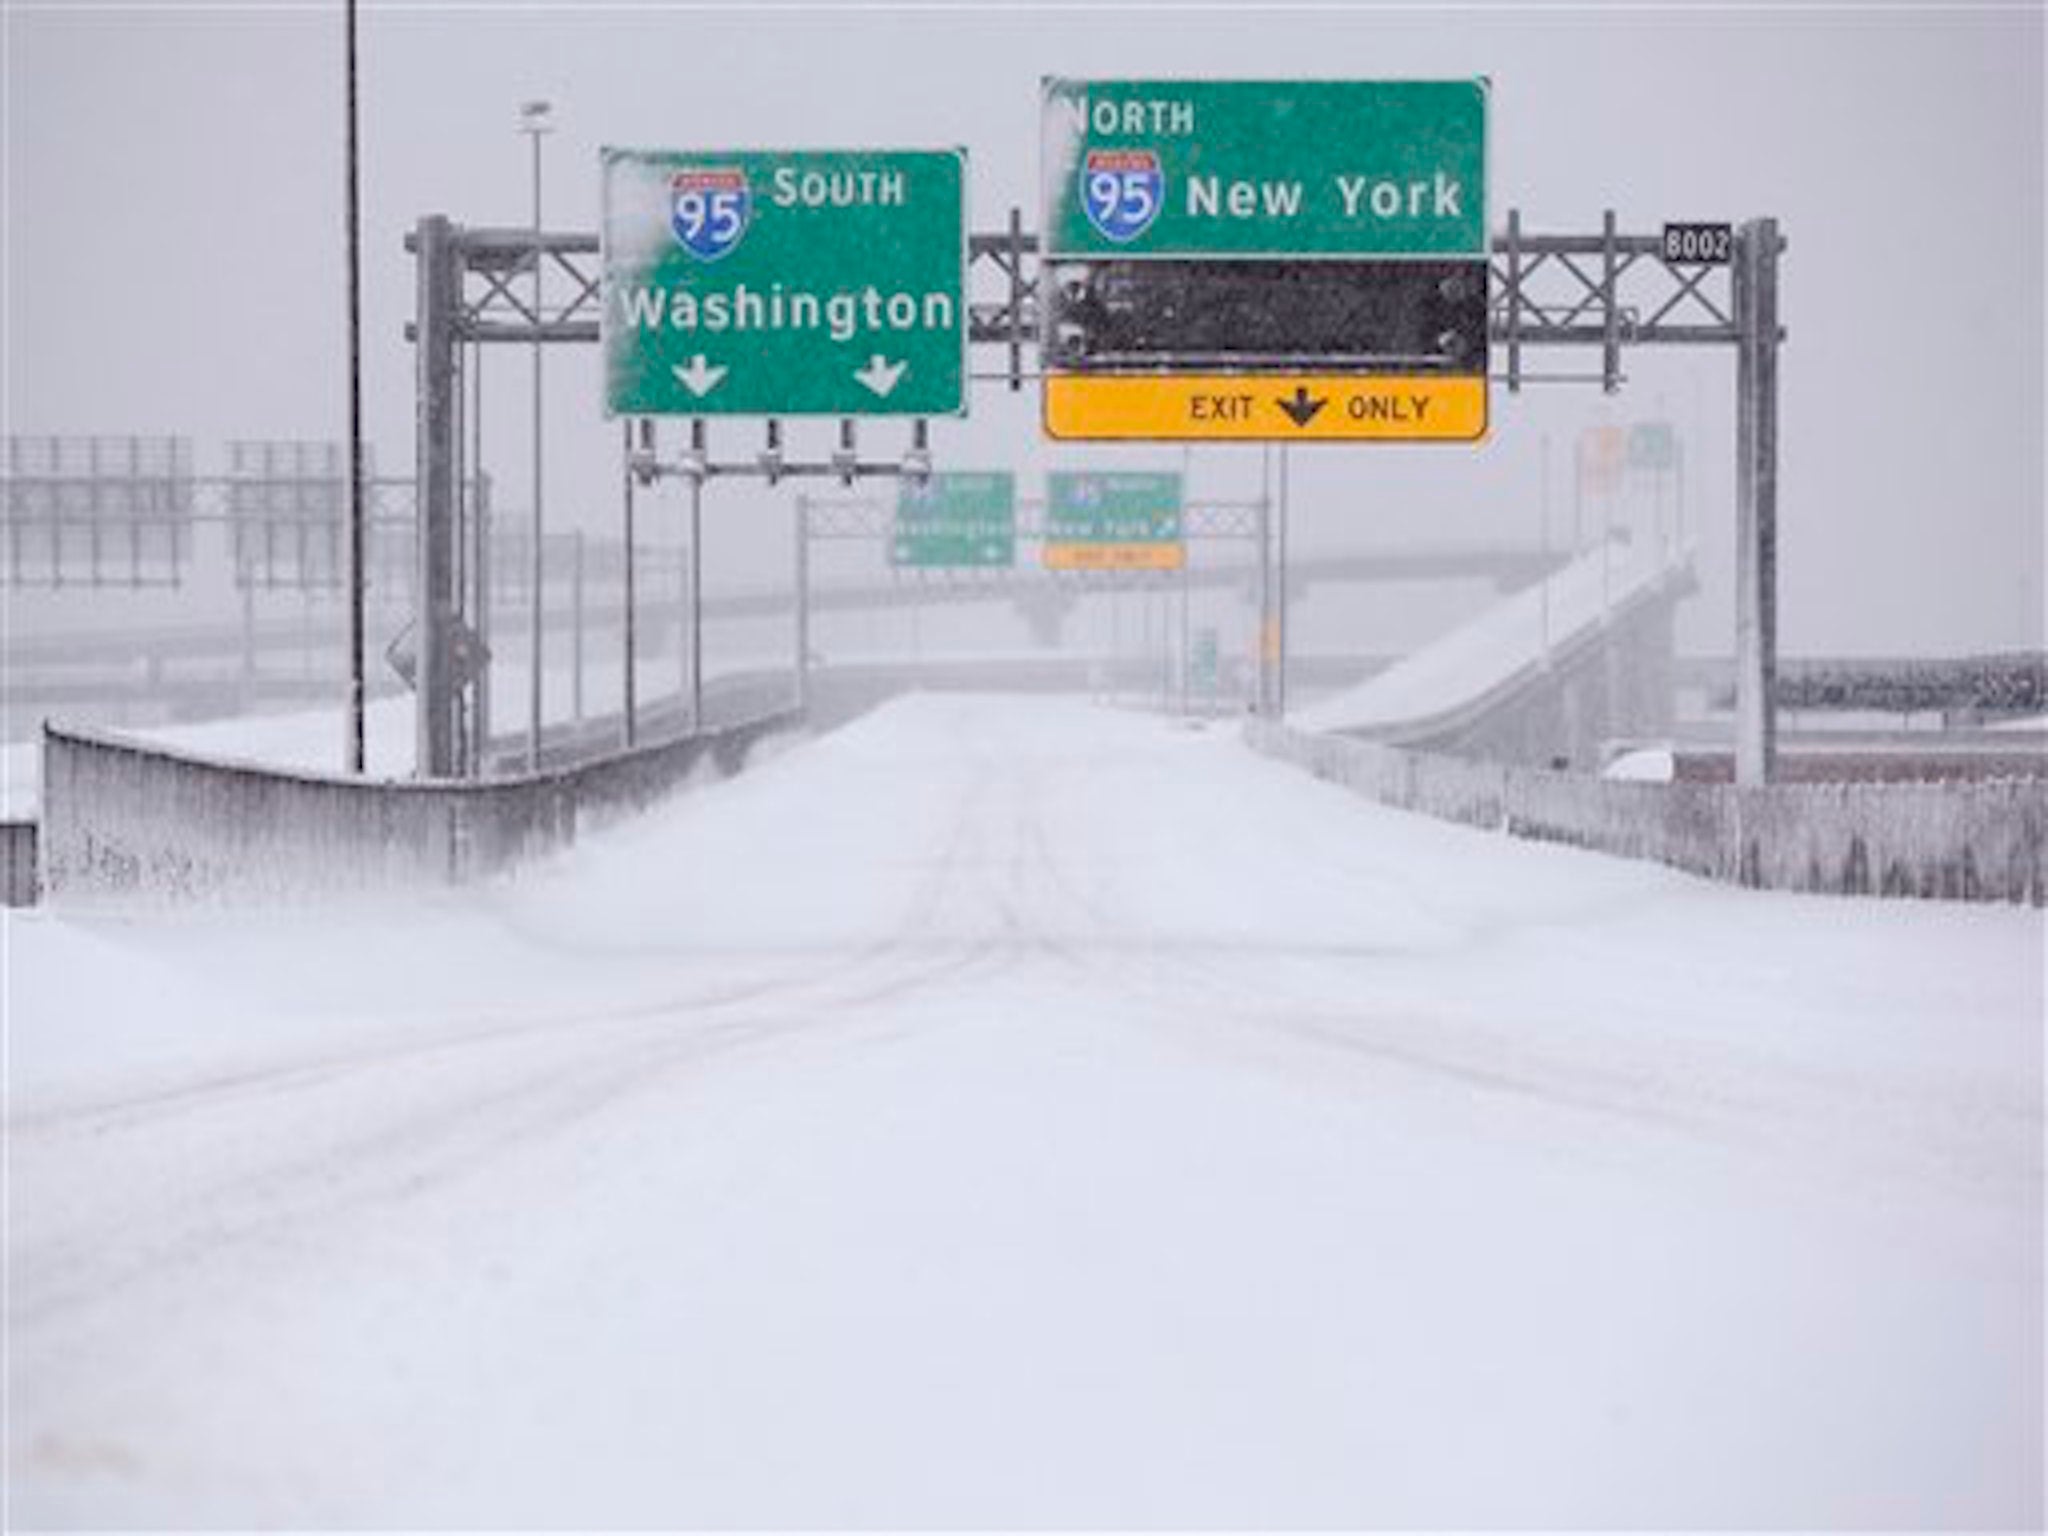 The US east coast is preparing for massive snow storms